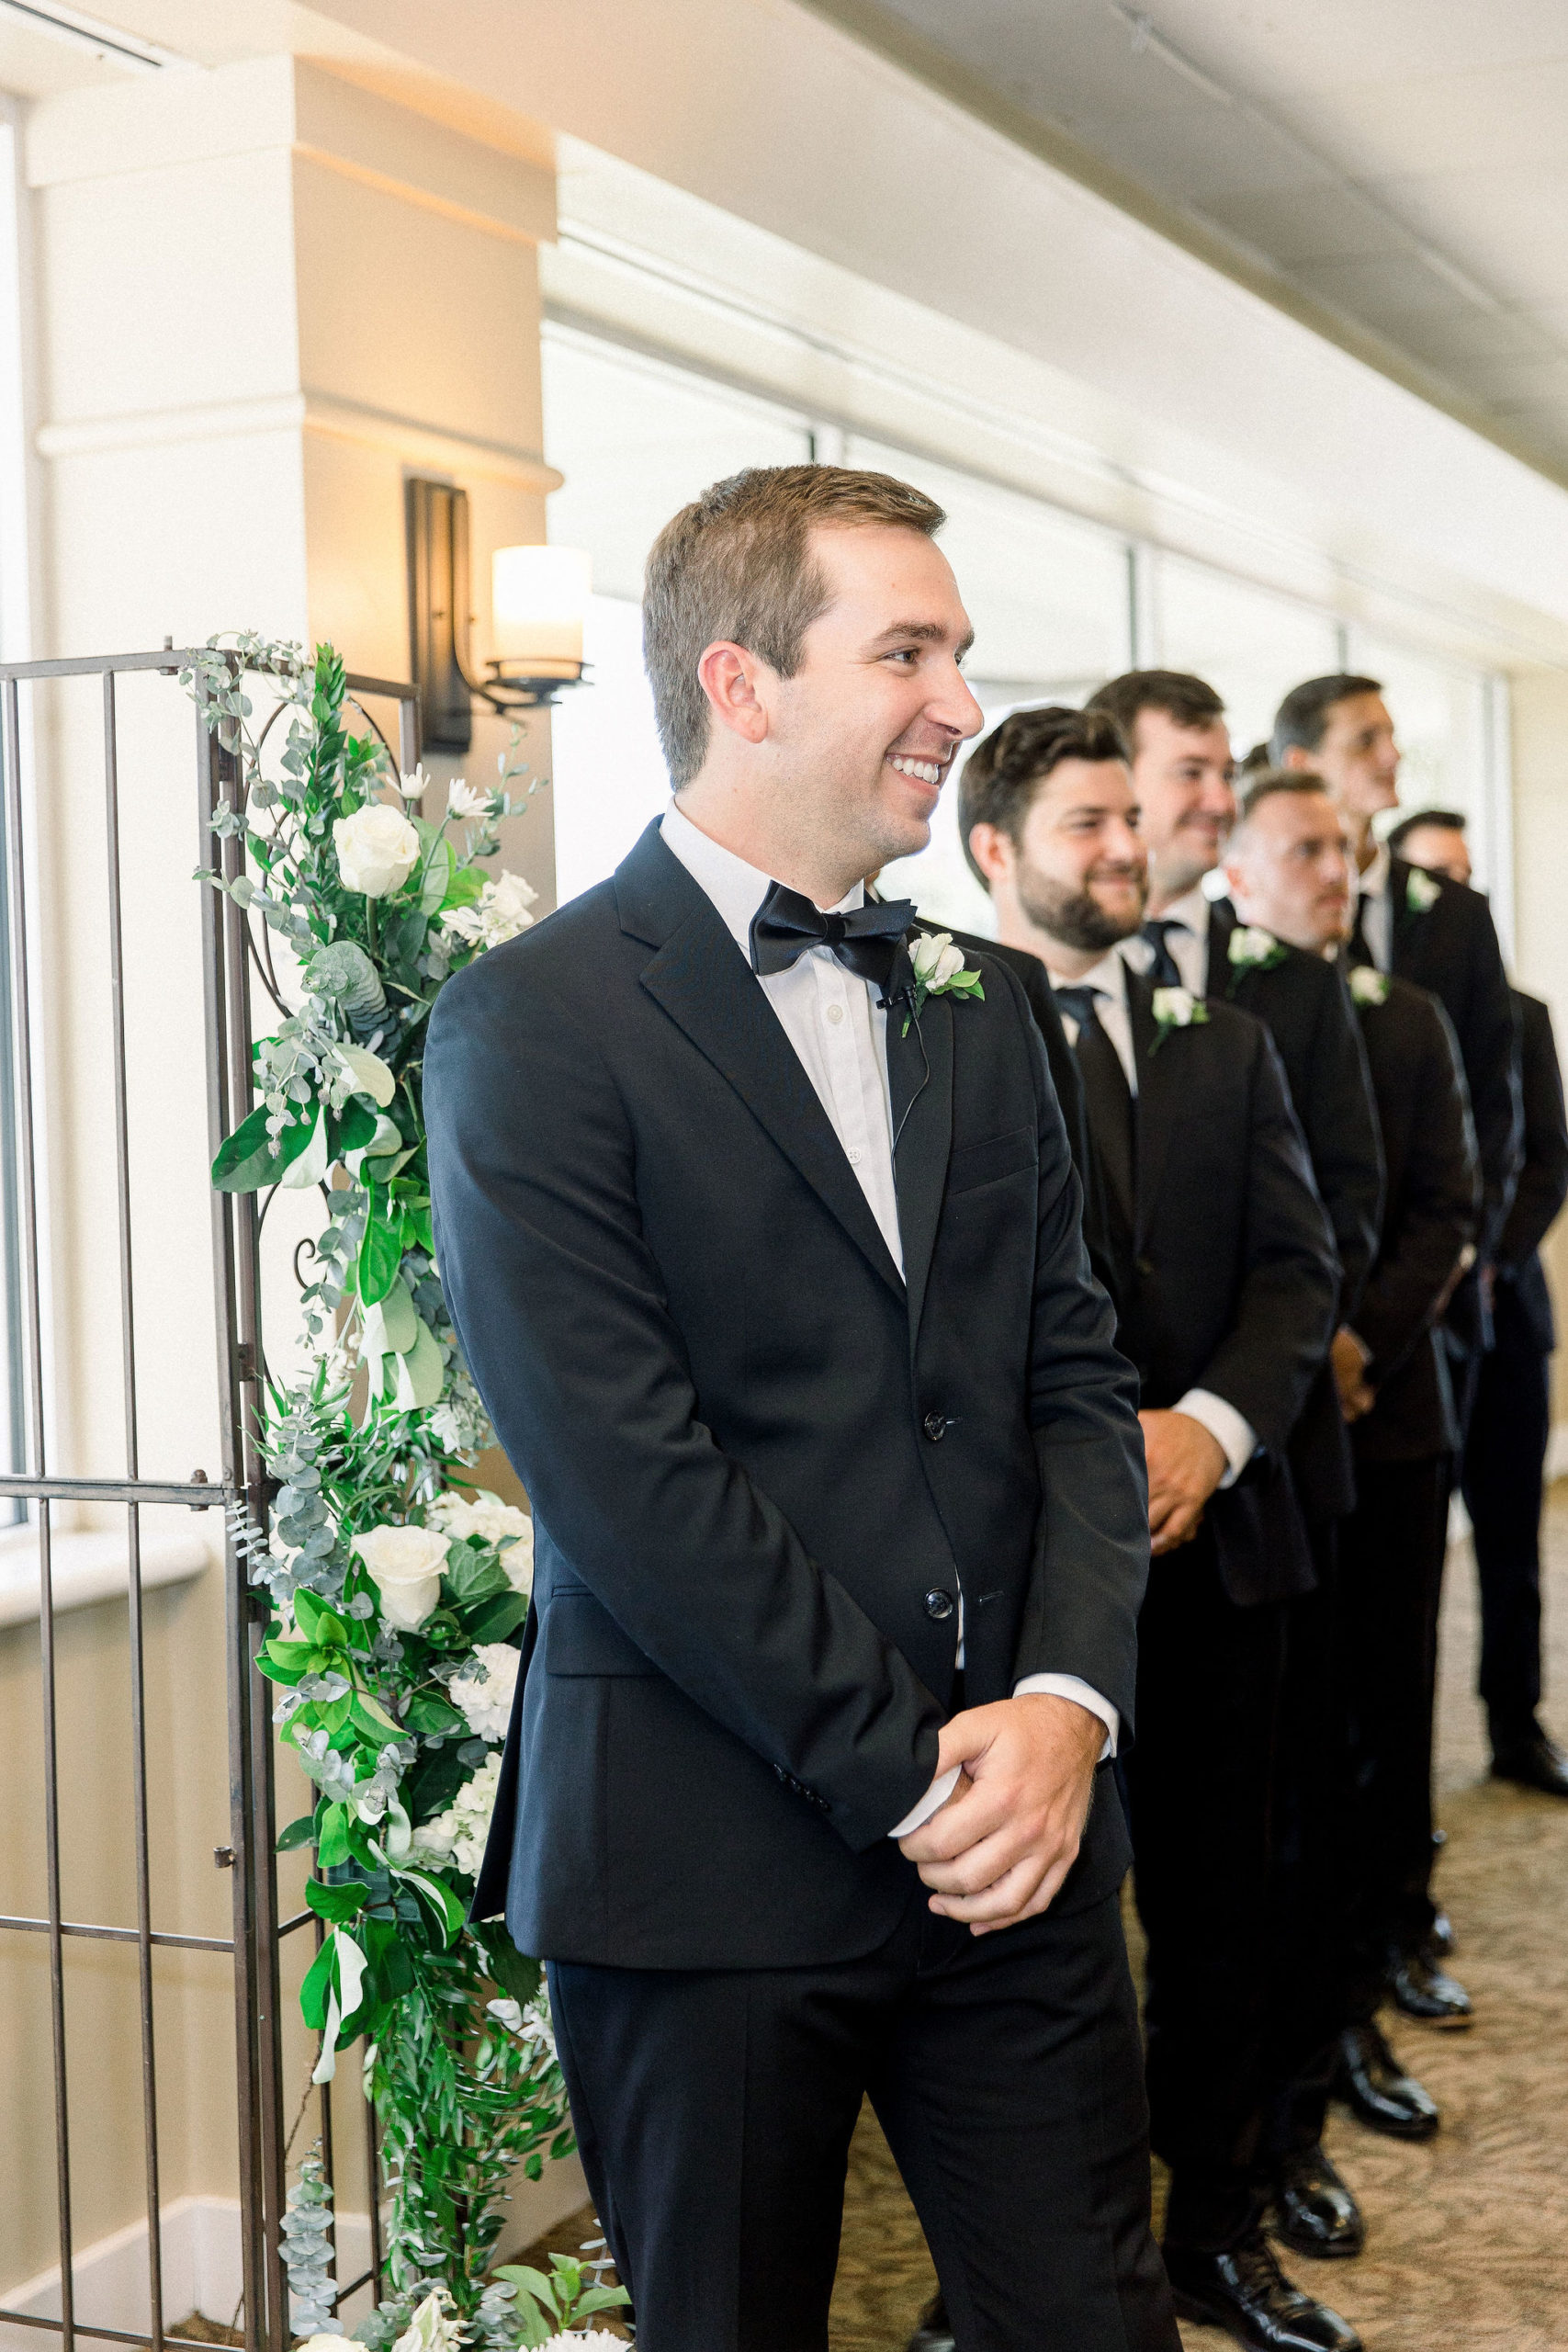 Groom in a black suit and a black bowtie stands with his groomsmen waiting for his bride with a smile on his face captured by Jommy Photography. Smiling groom waiting for his bride at the wedding altar.
